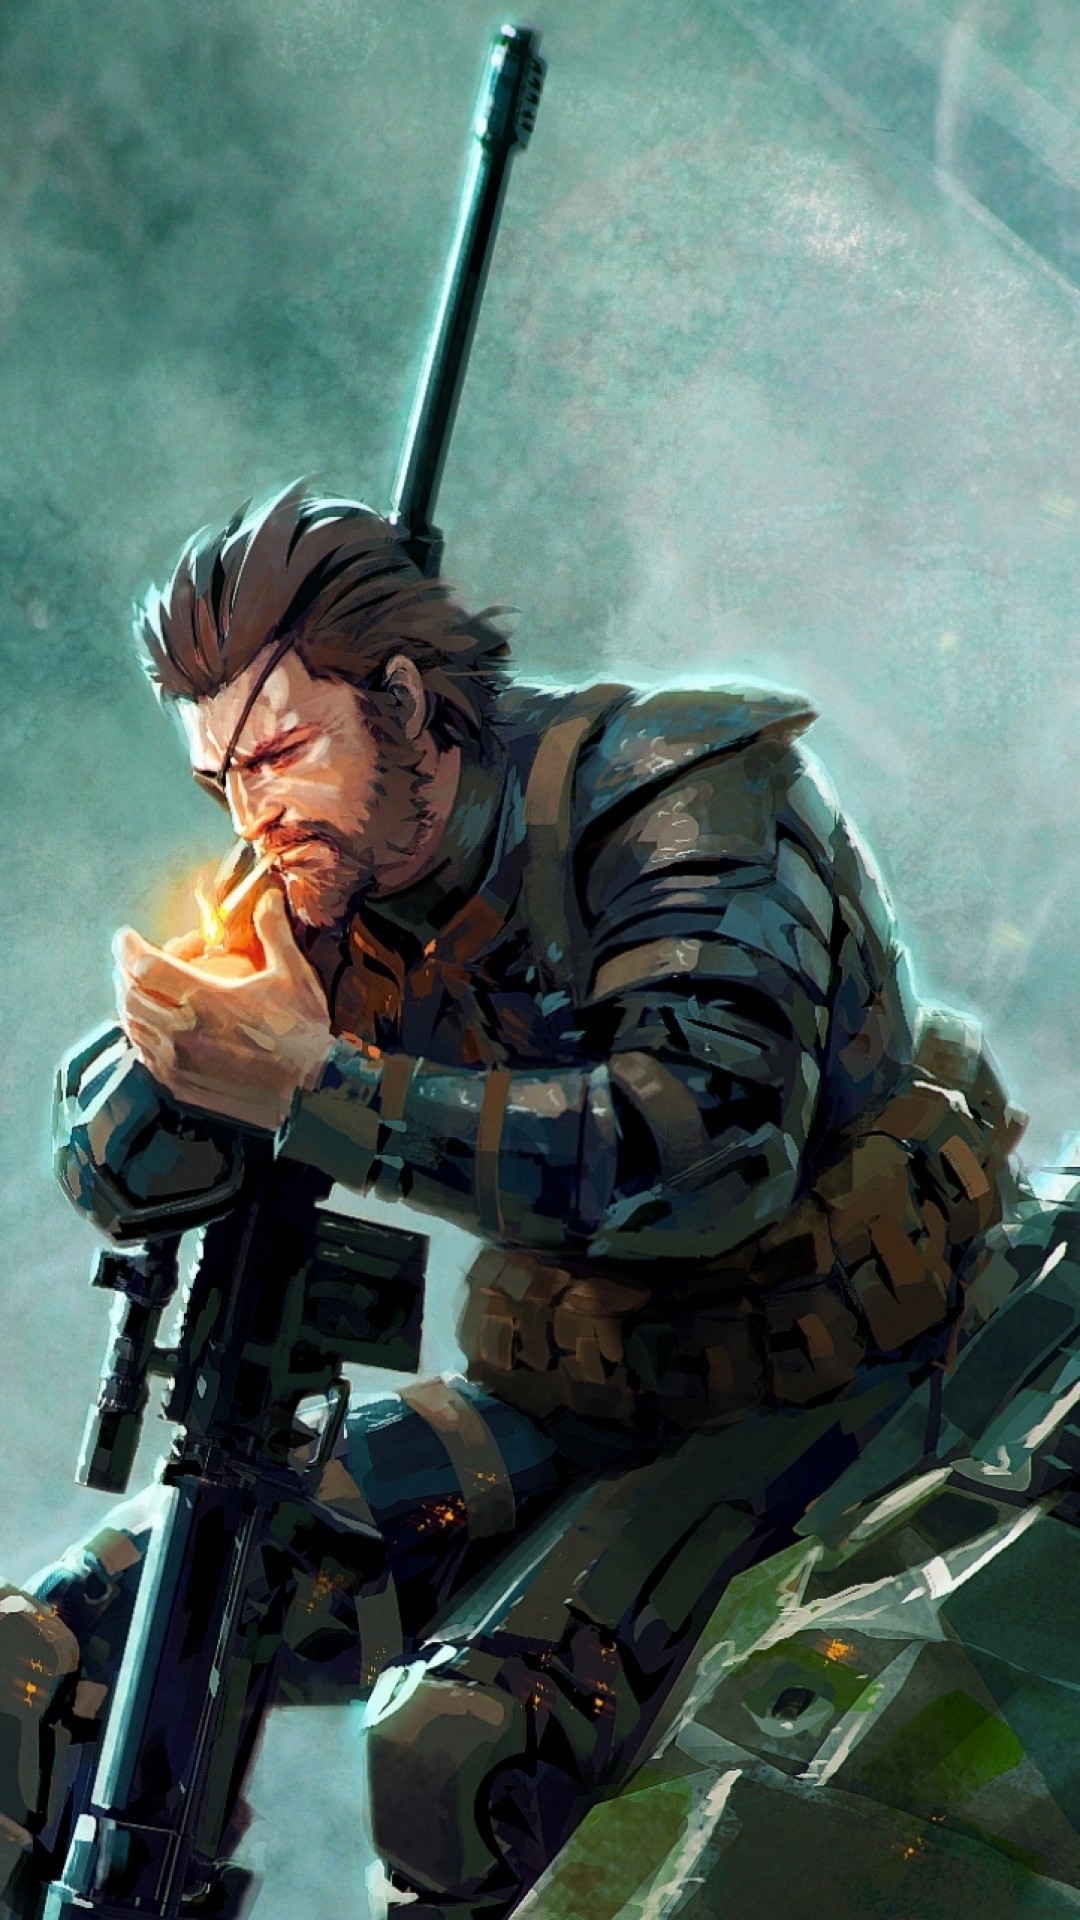 metal gear solid wallpaper,action adventure game,soldier,movie,cg artwork,pc game